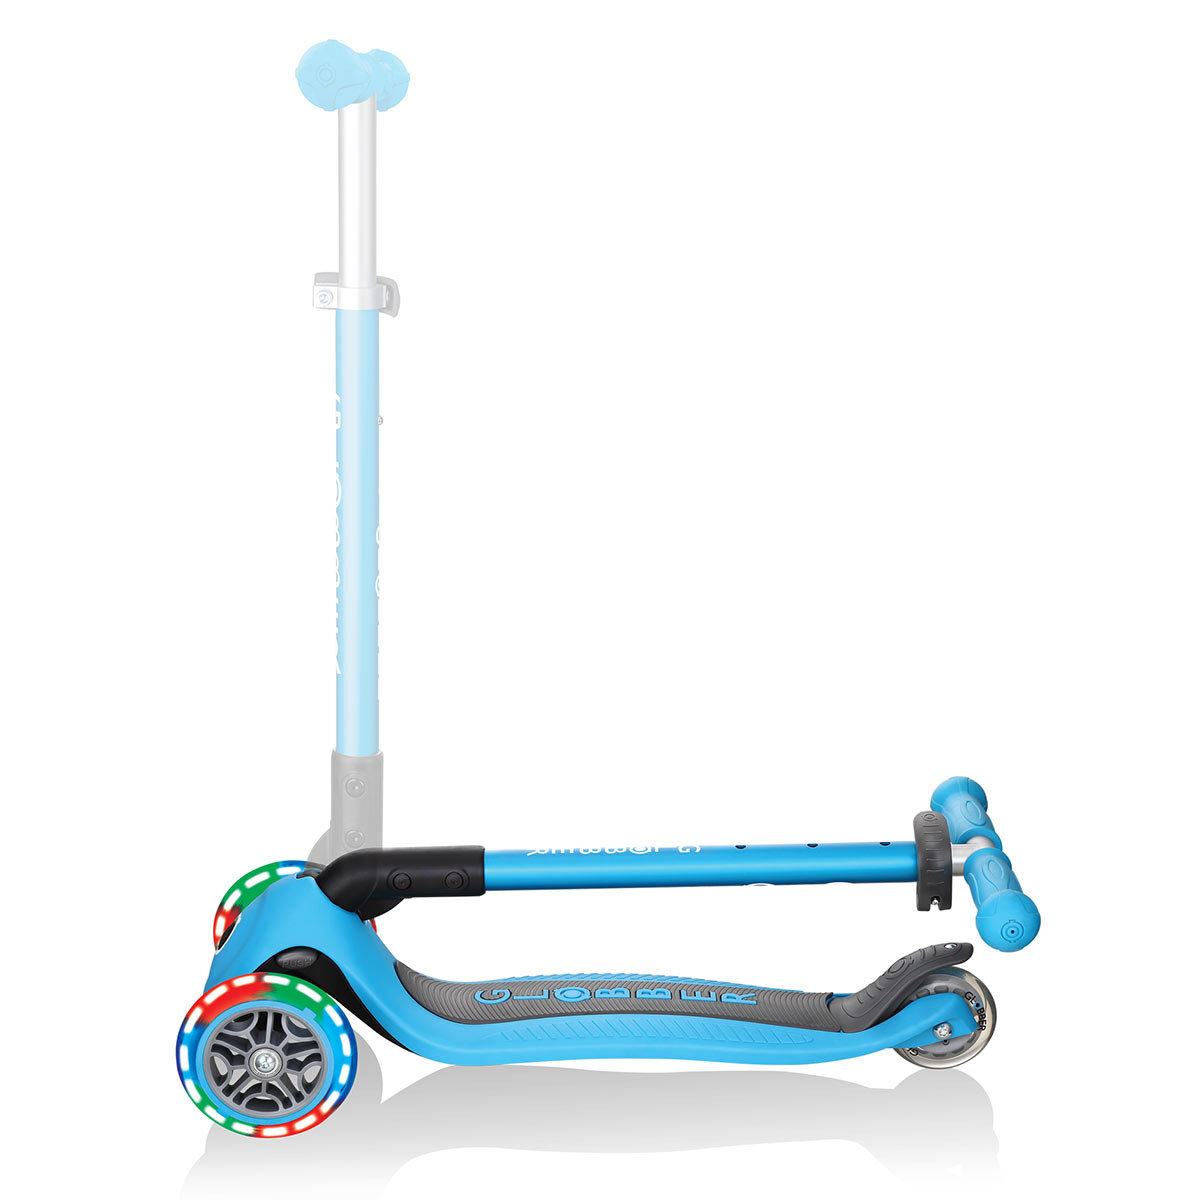 Buy Globber Primo Lights Scooter in Sky Blue 6 Image at Costco.co.uk